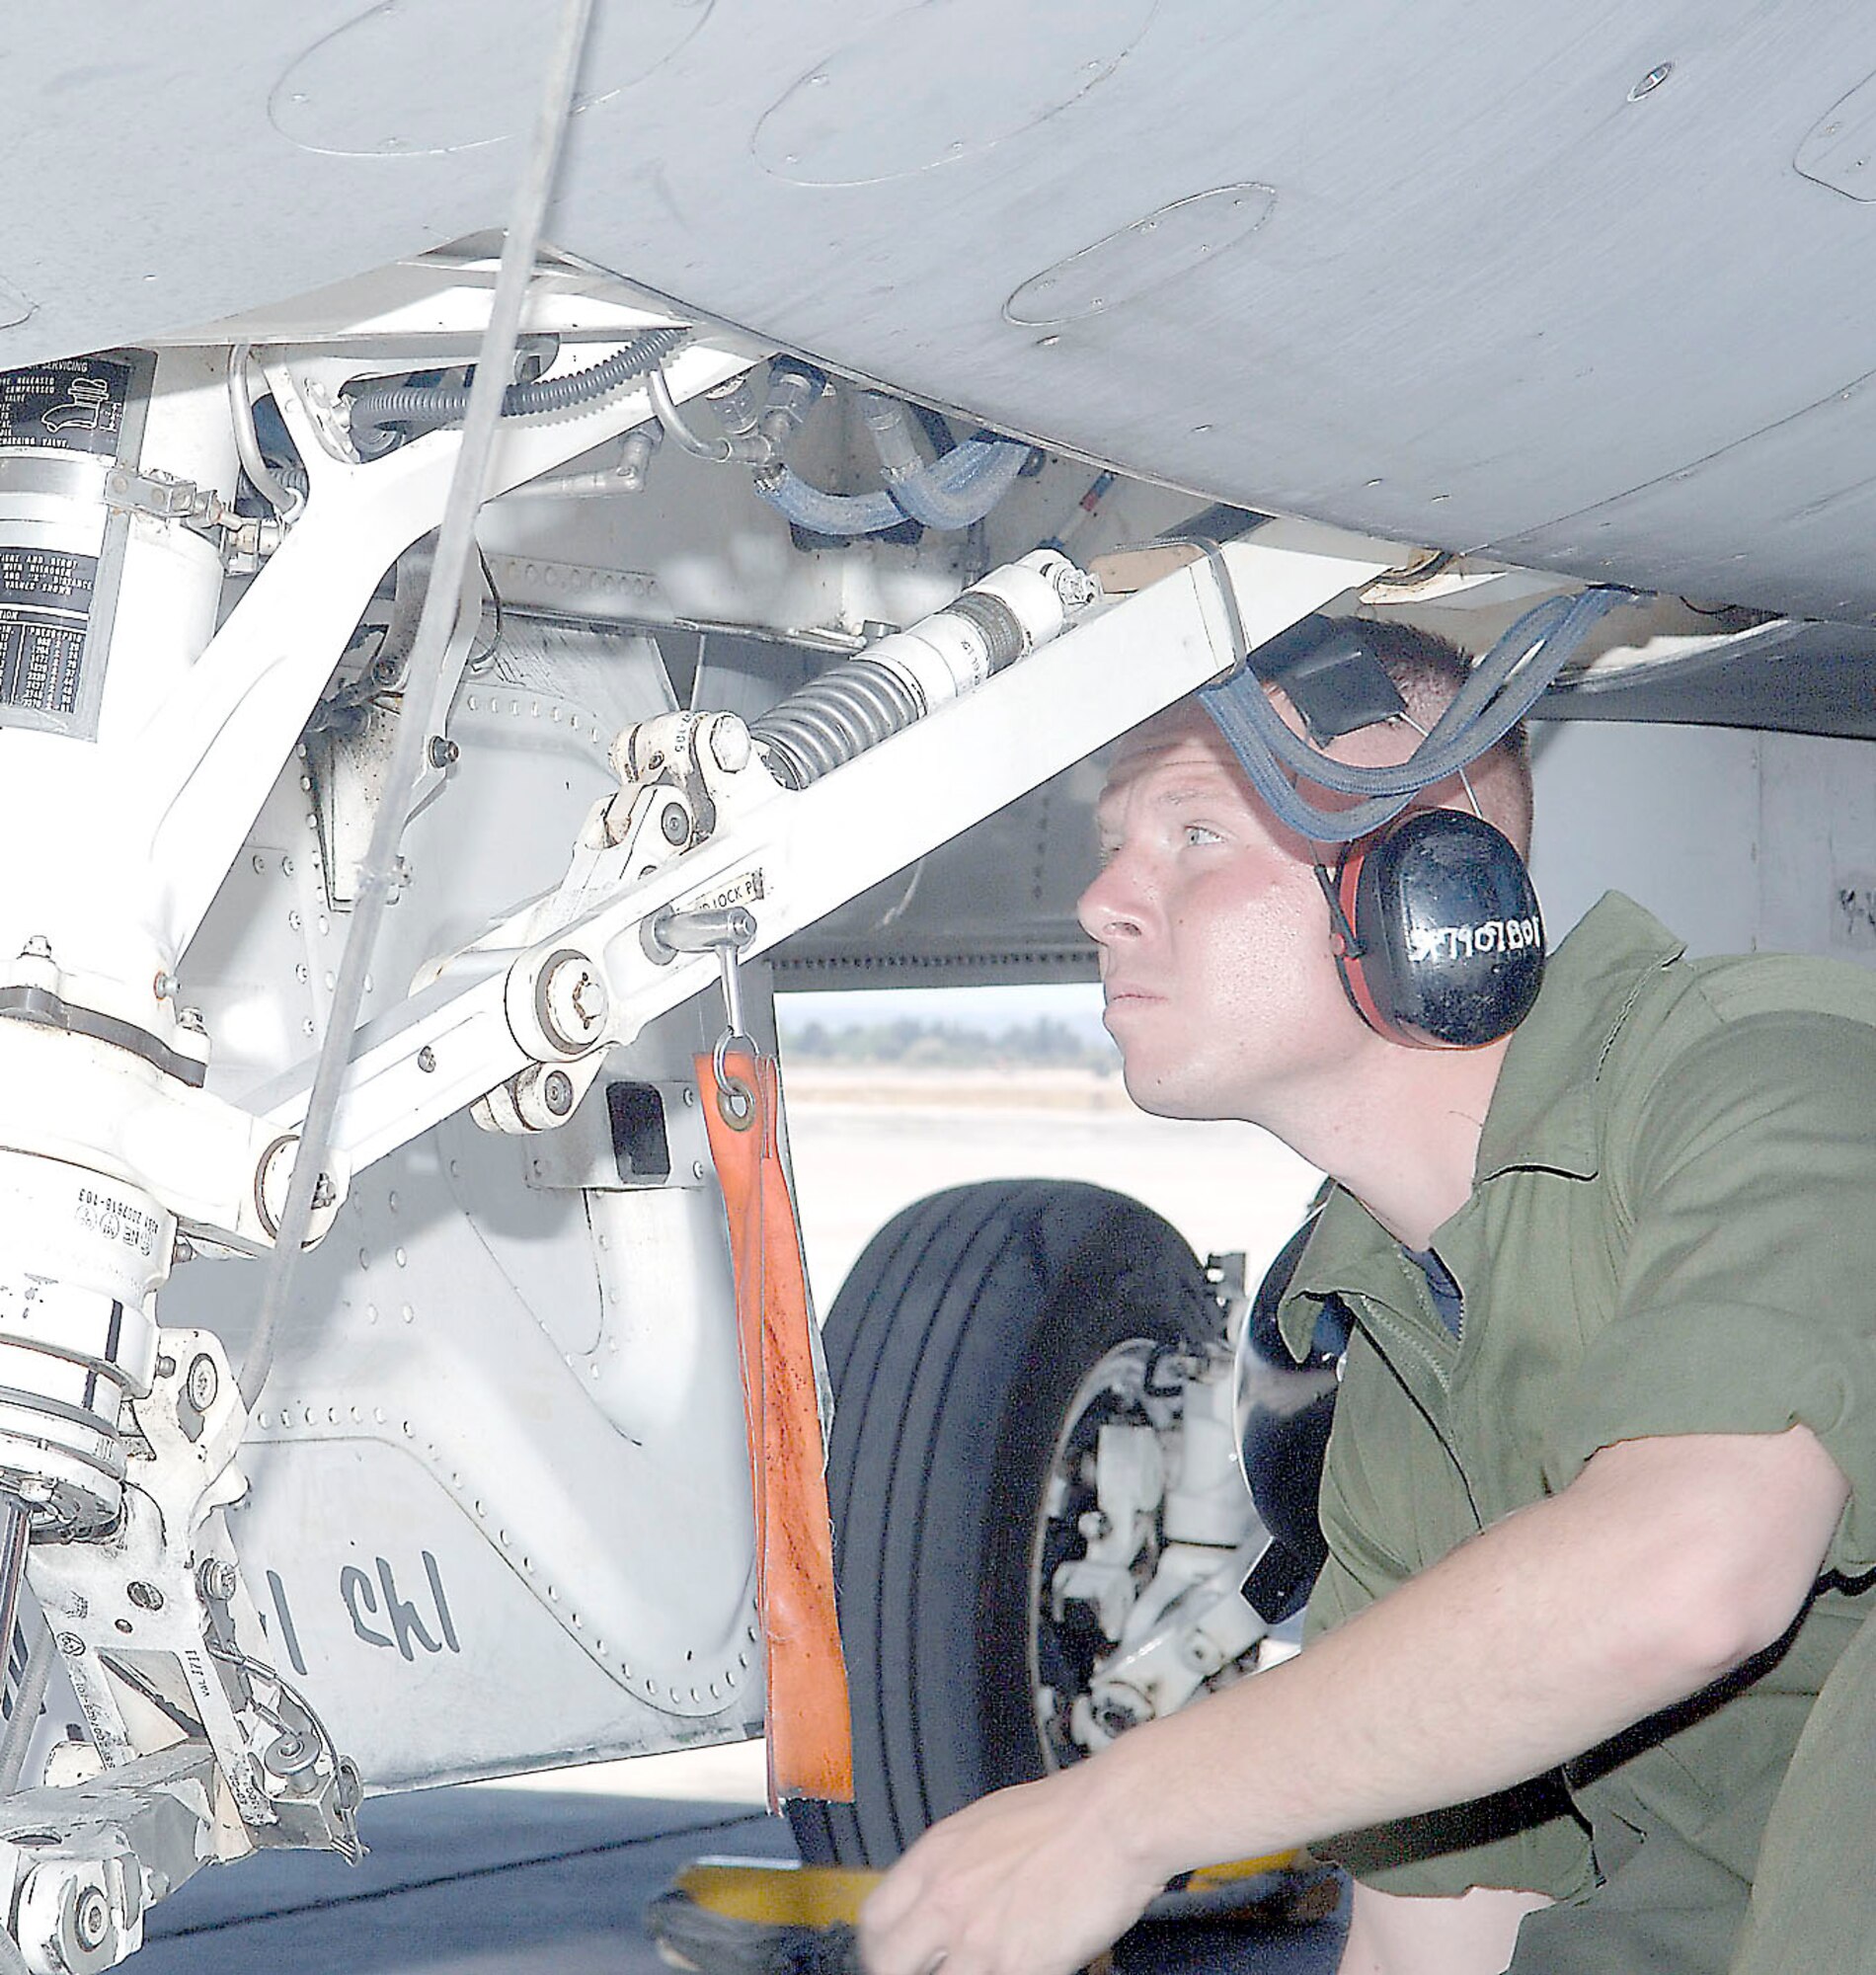 Staff Sgt. Jeremy Lewis, 79th Fighter Squadron crew chief, inspects landing gear on a jet. (U.S. Air Force Photo/Airman 1st Class Andrew Dumboski)